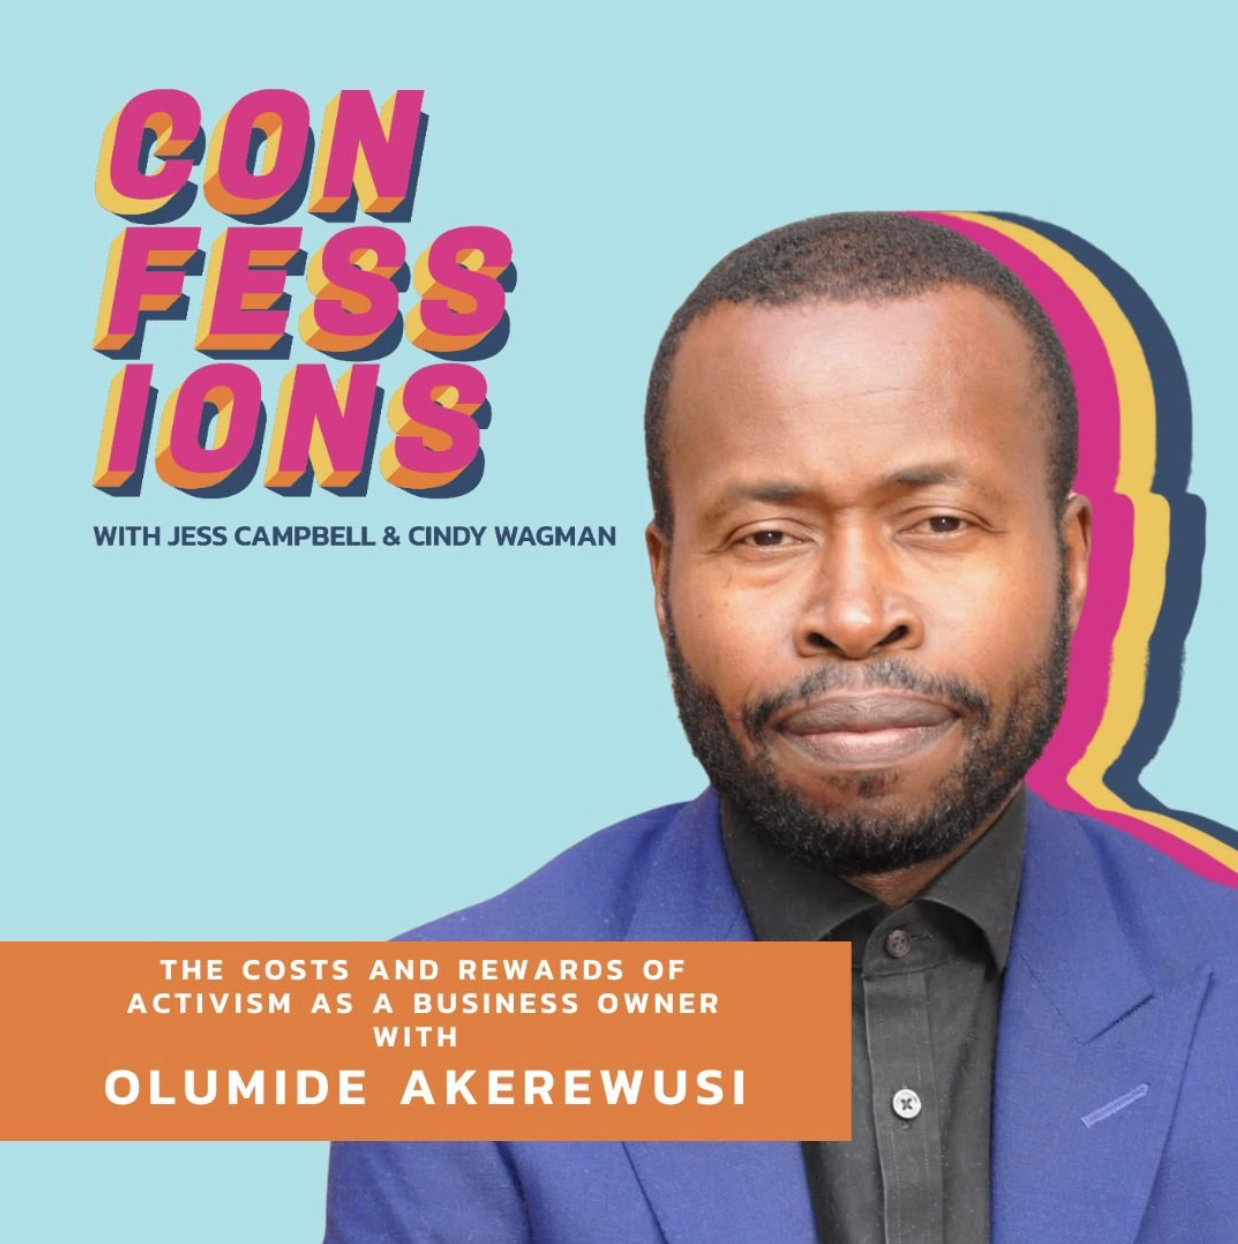 The Costs and Rewards of Activism as a Business Owner with Olumide Akerewusi